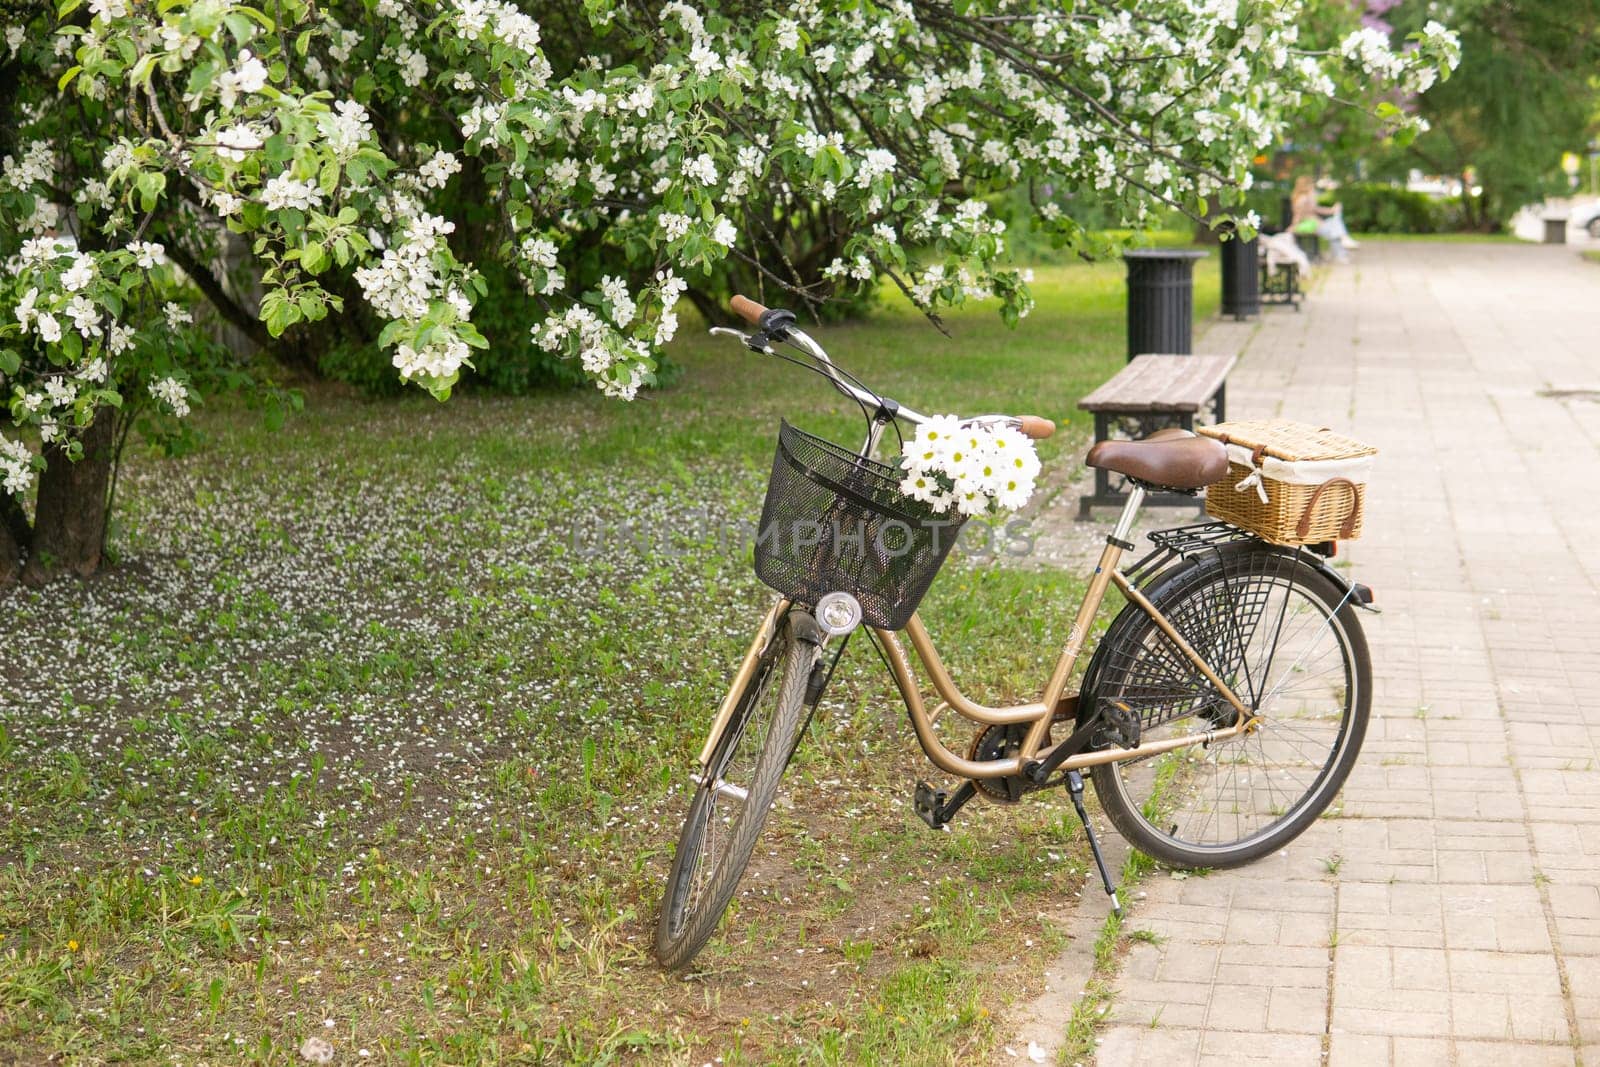 A beautiful retro bike with a wicker basket stands next to a blooming apple tree in the park. by Annu1tochka